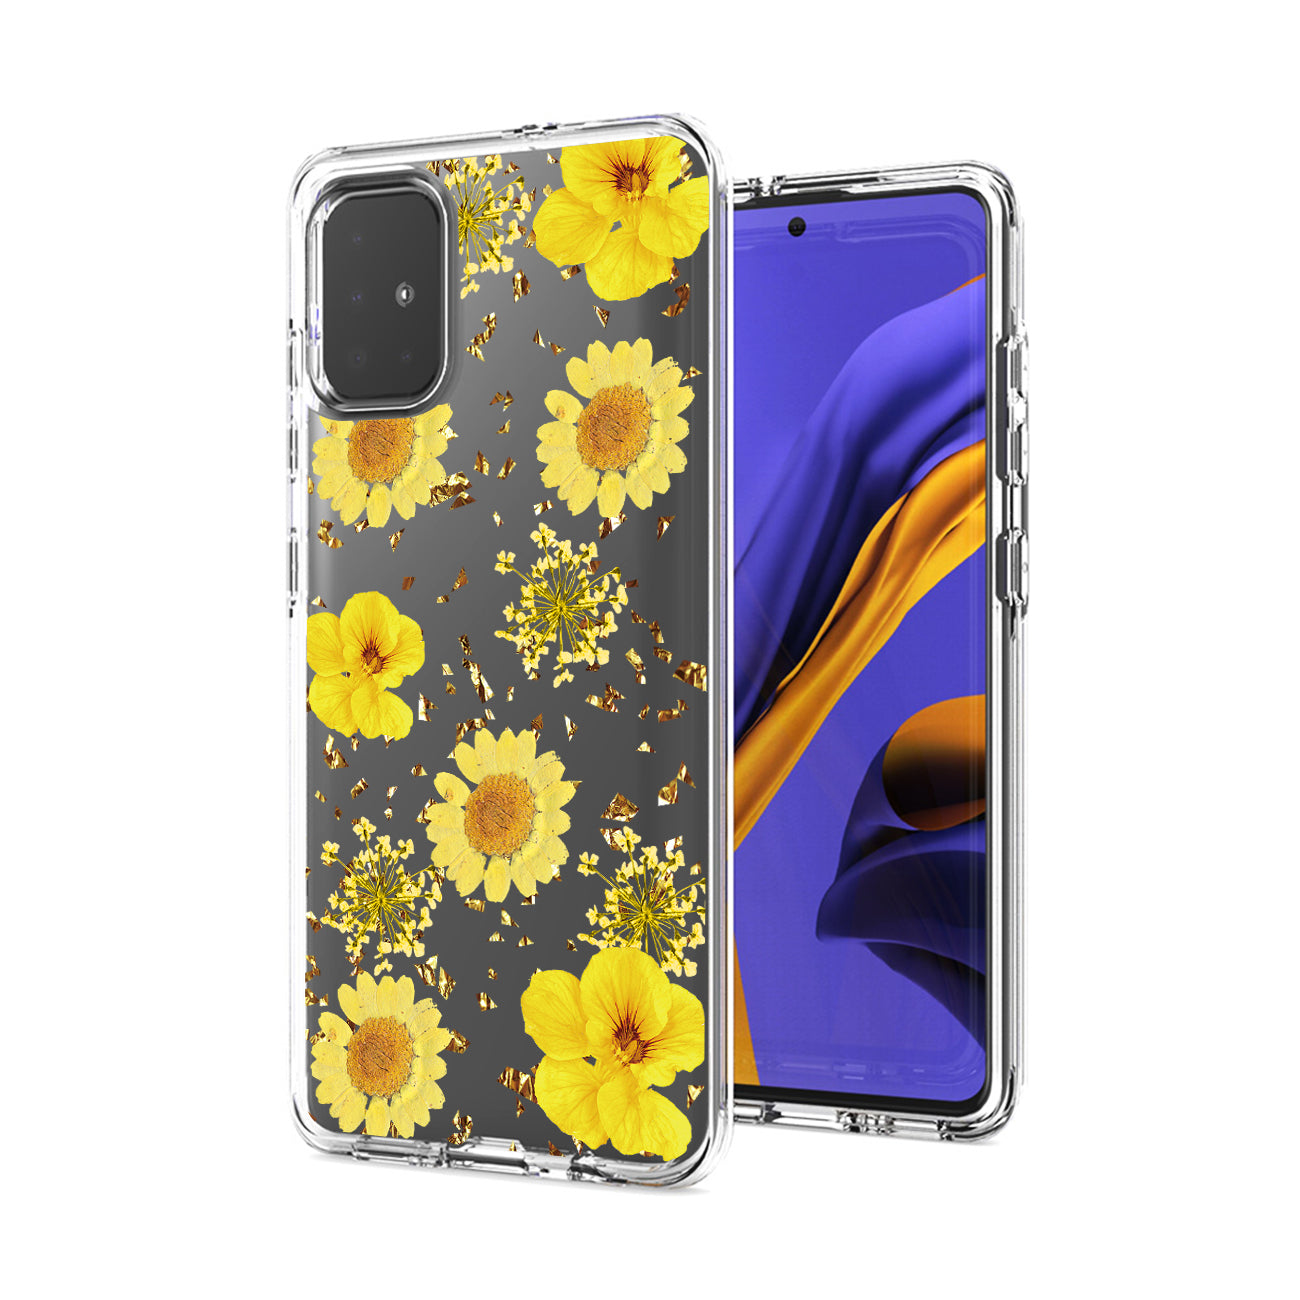 Pressed dried flower Design Phone case for SAMSUNG GALAXY A51 5G In Yellow